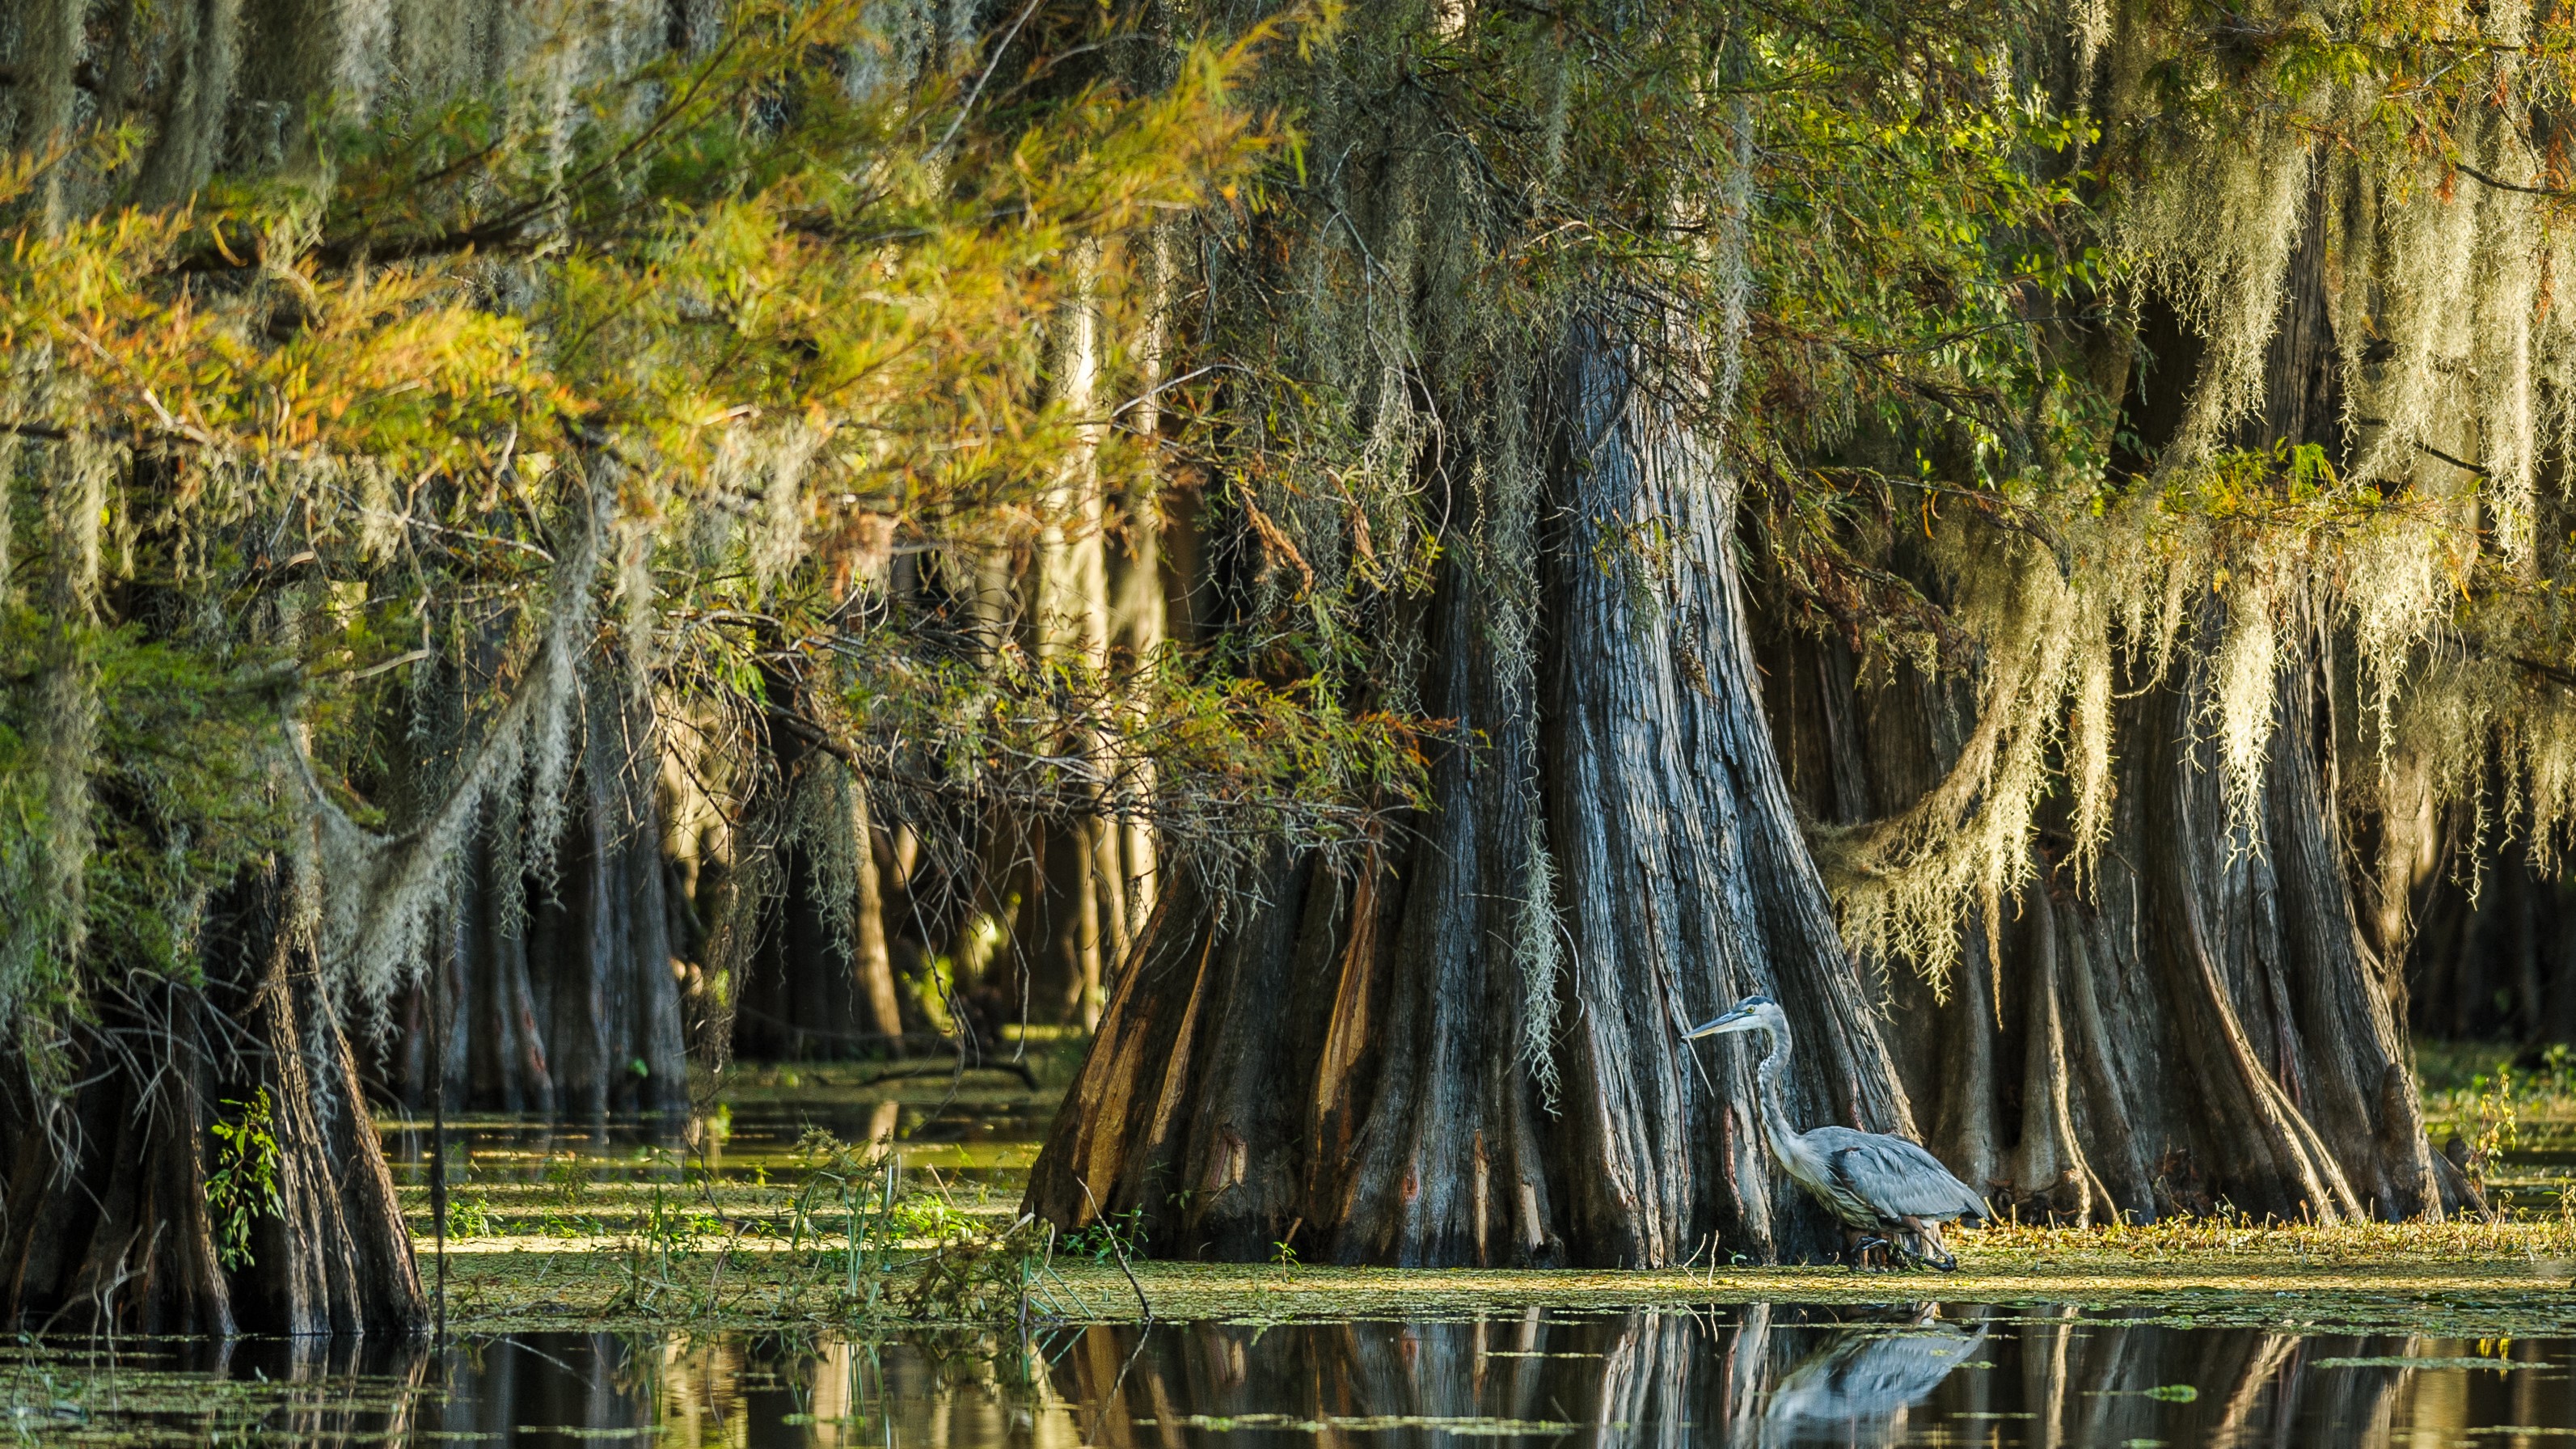 a huge unrobed cypress tree in a swamp with a heron in front of it